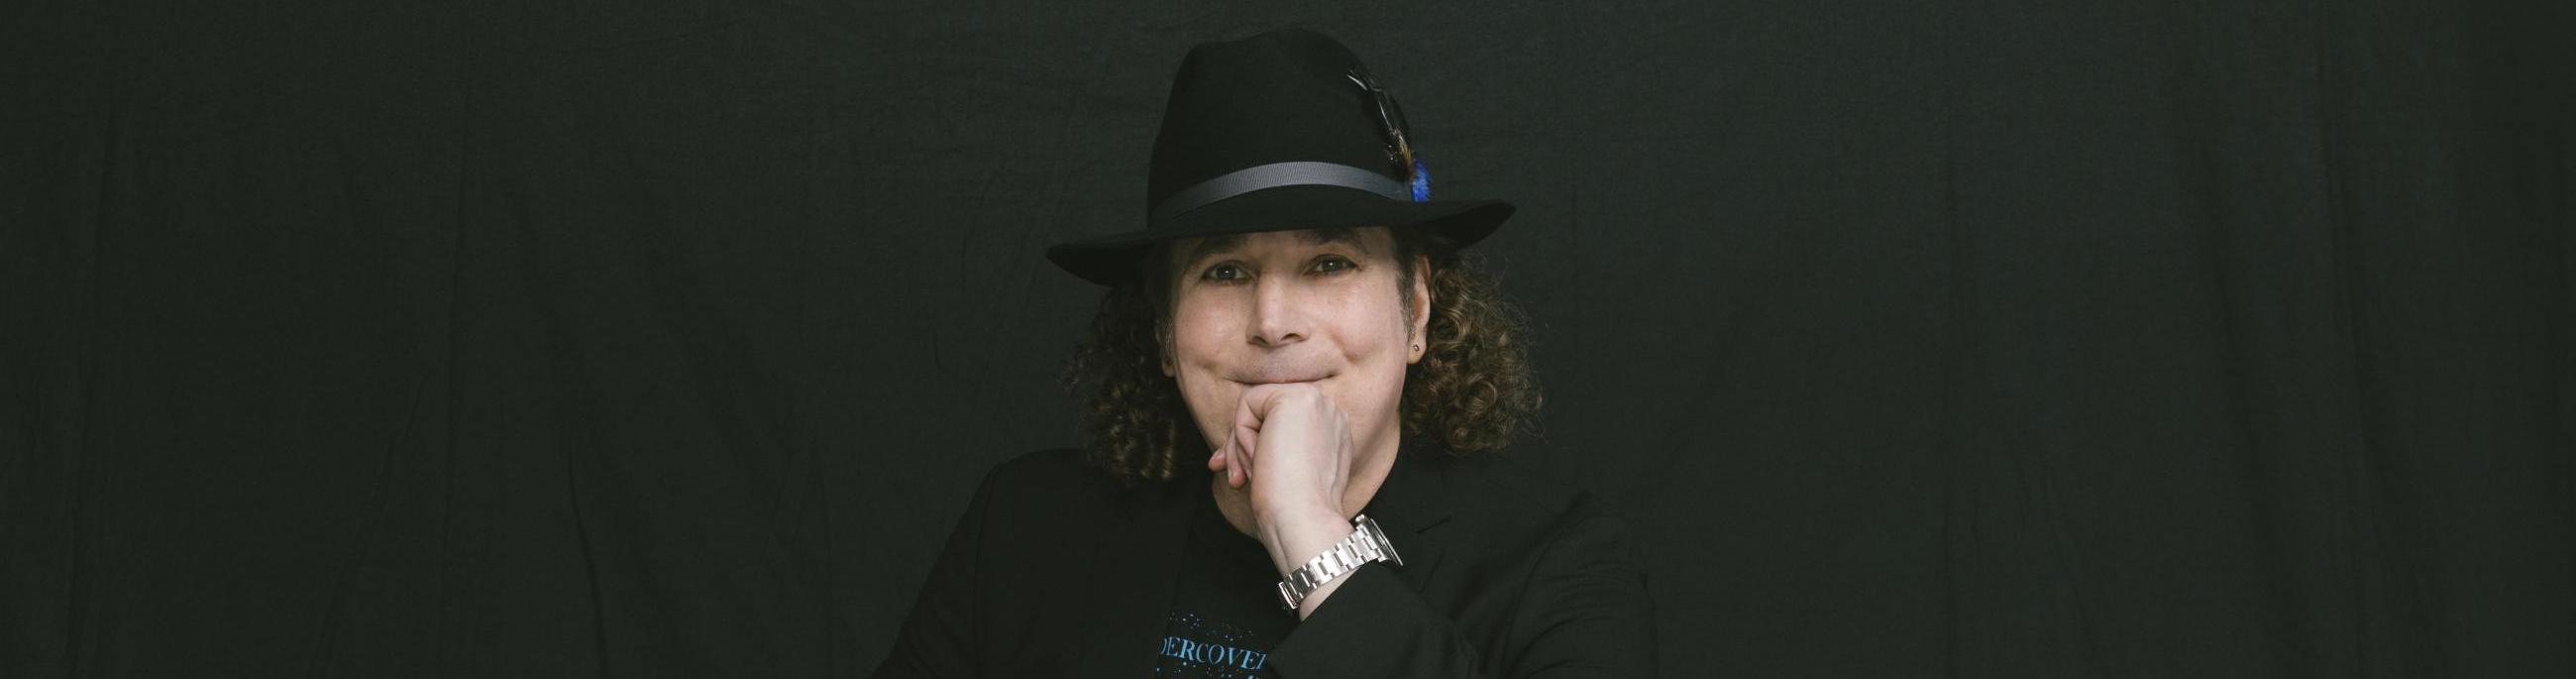 white man with curly brown hair wearing all black and a black hat in front of a black background.